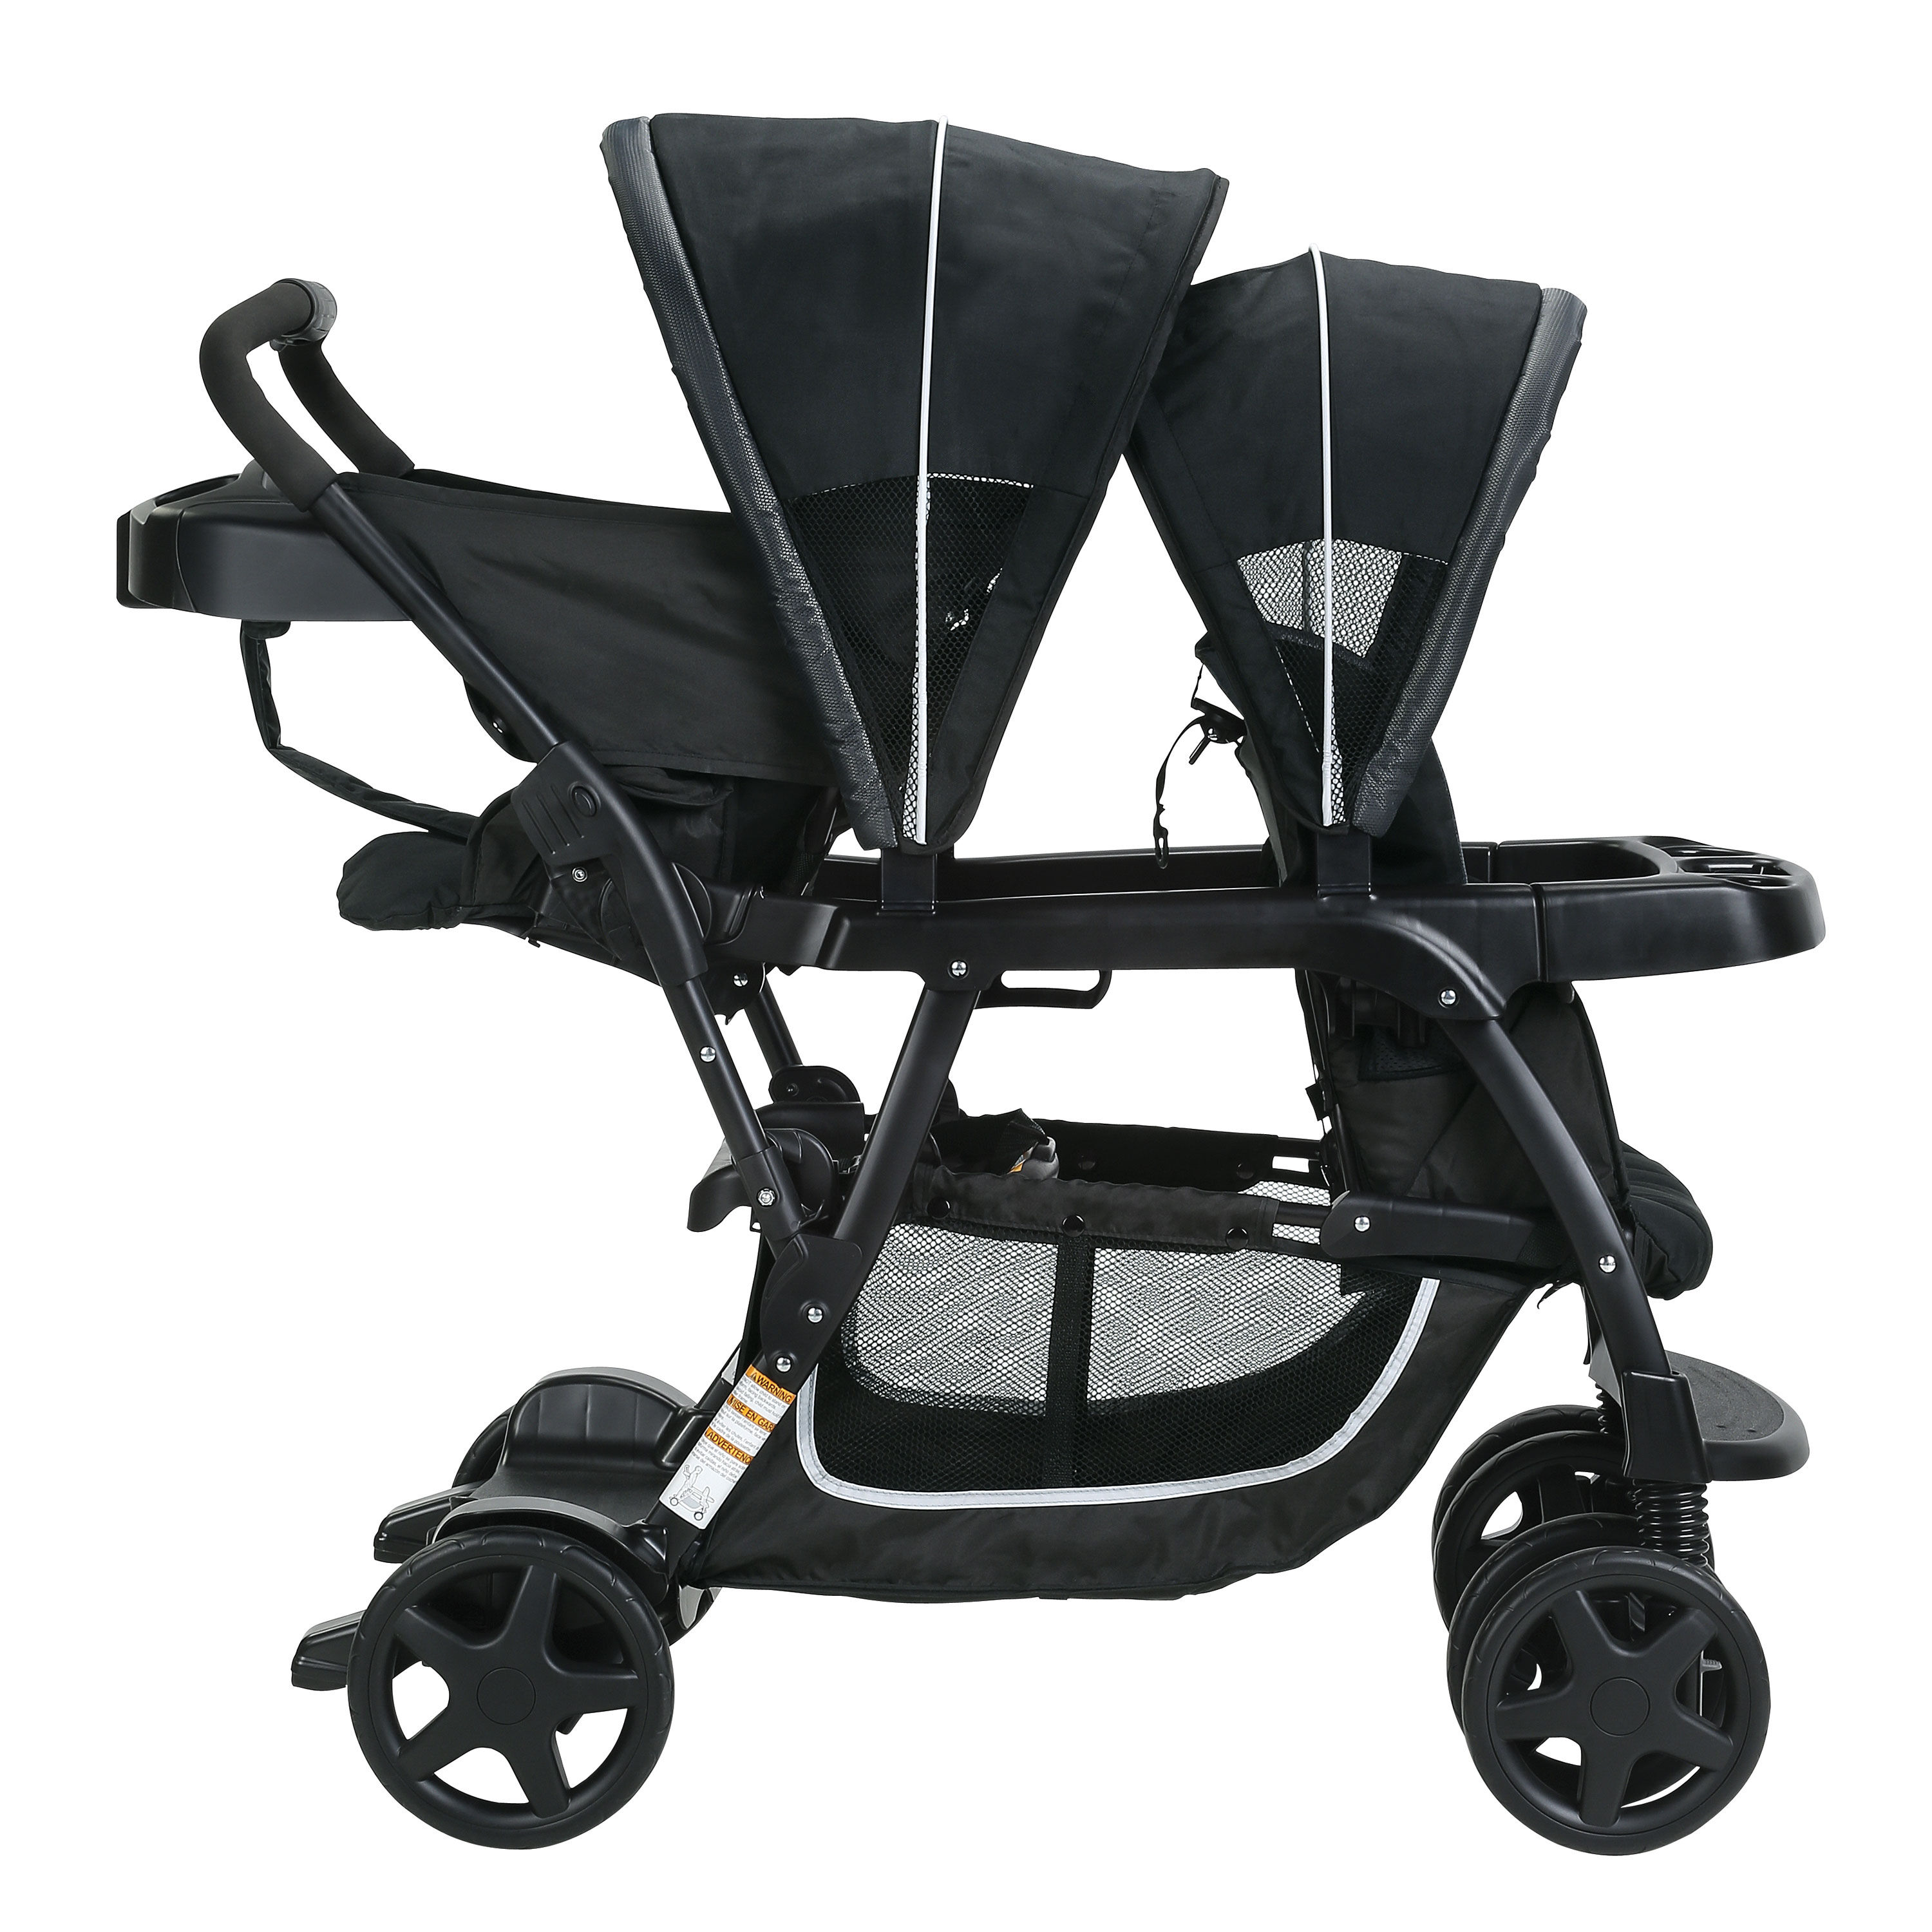 graco double seat stroller